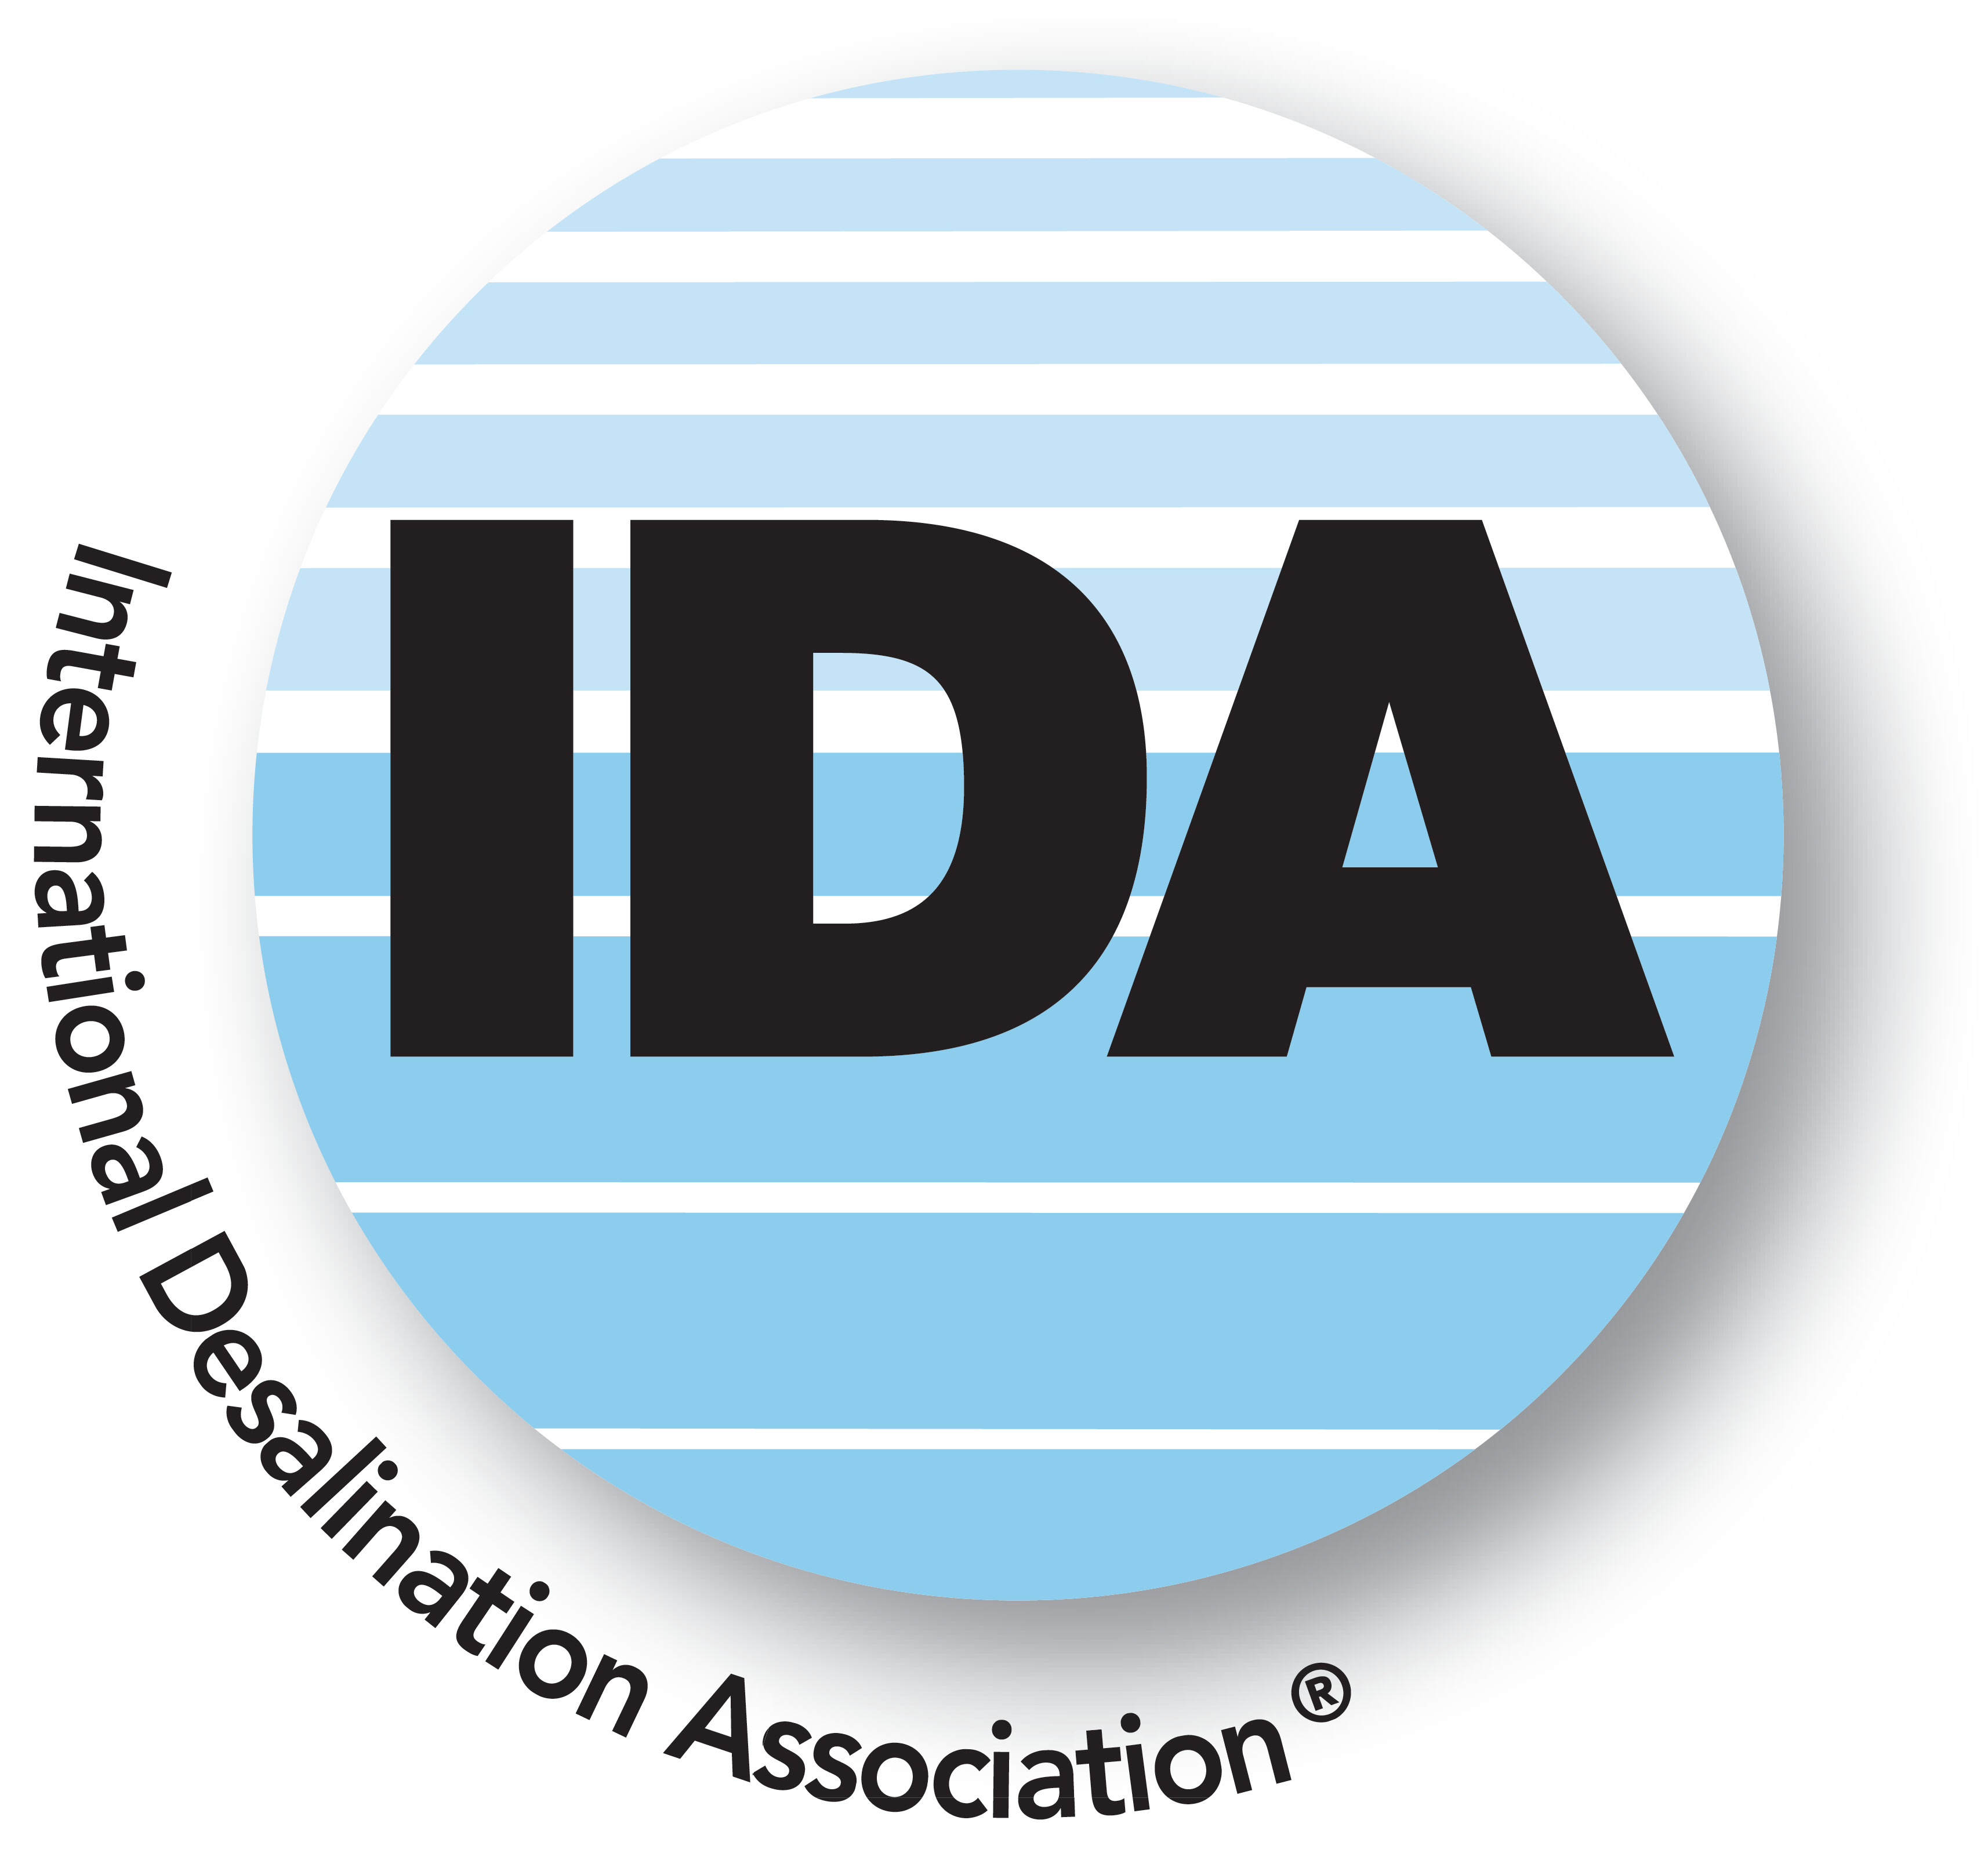 The IDA World Congress and exhibition will take place from 7–11 November 2021 in Sydney, Australia.